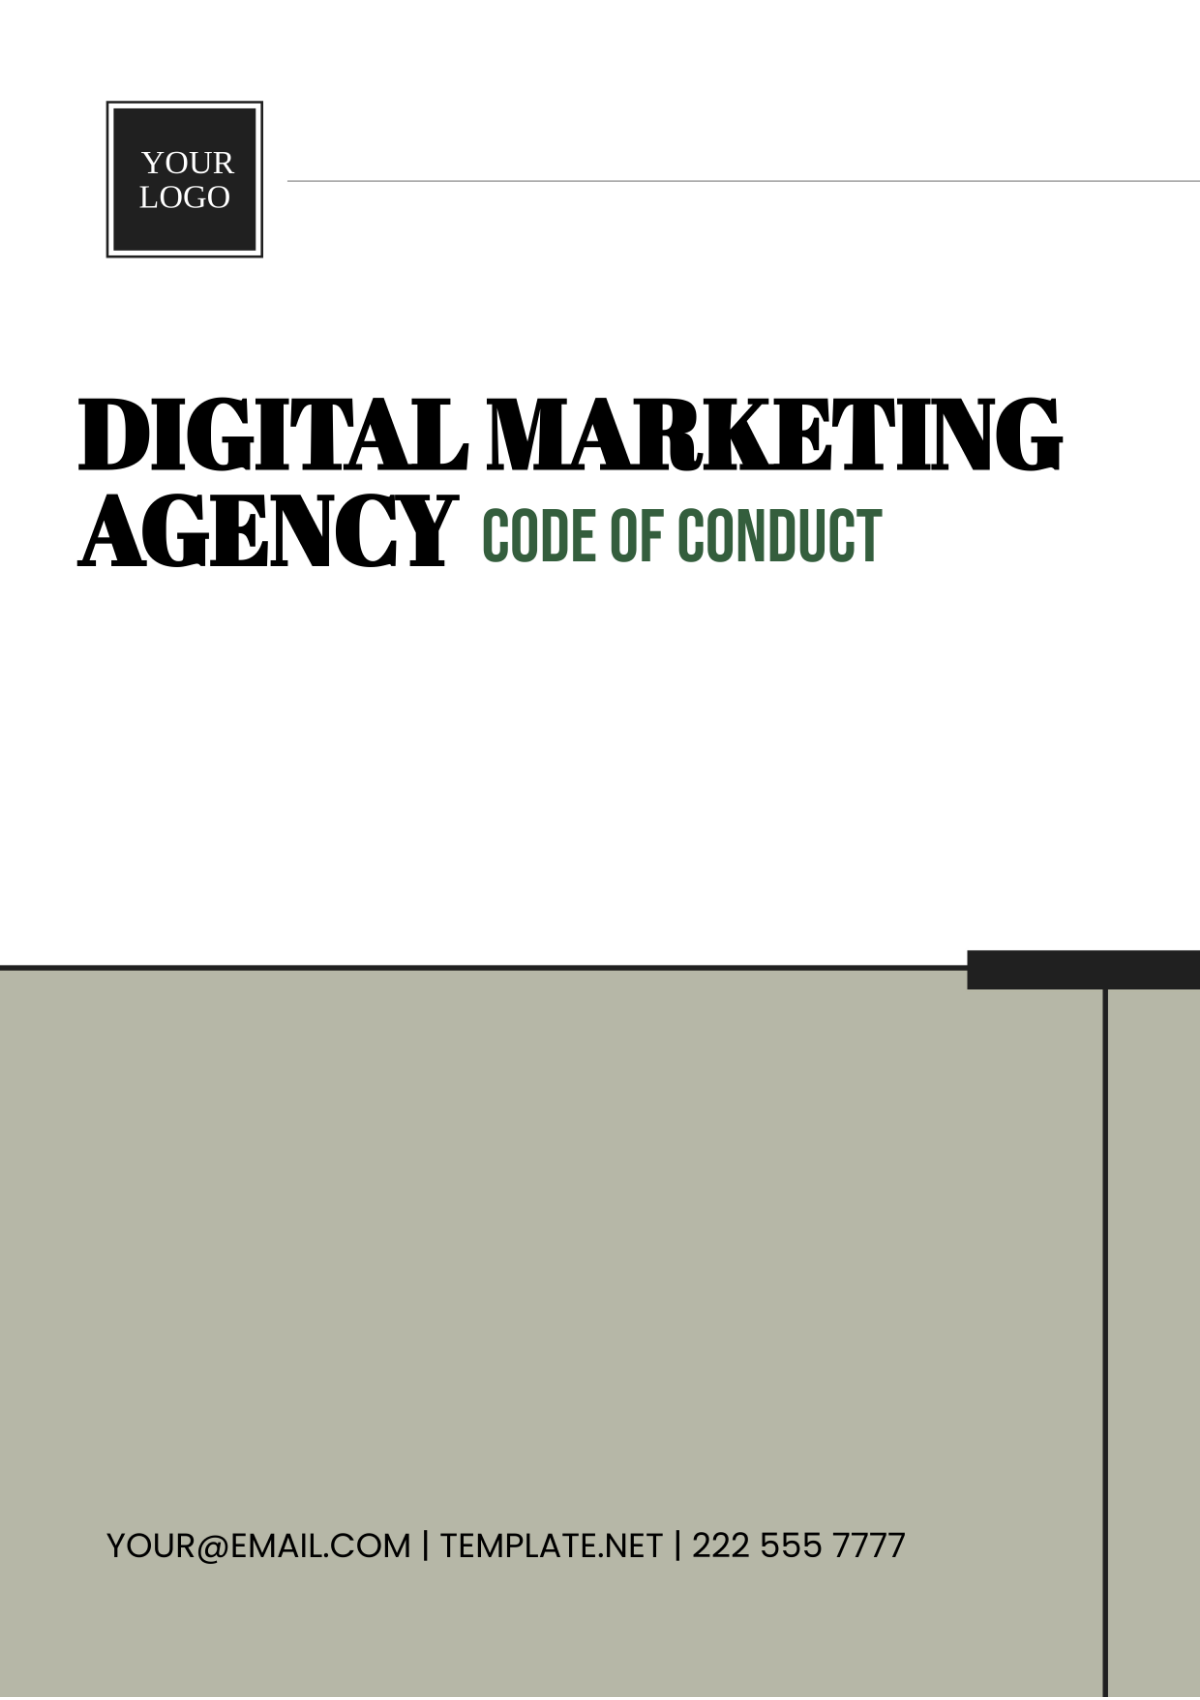 Digital Marketing Agency Code of Conduct Template